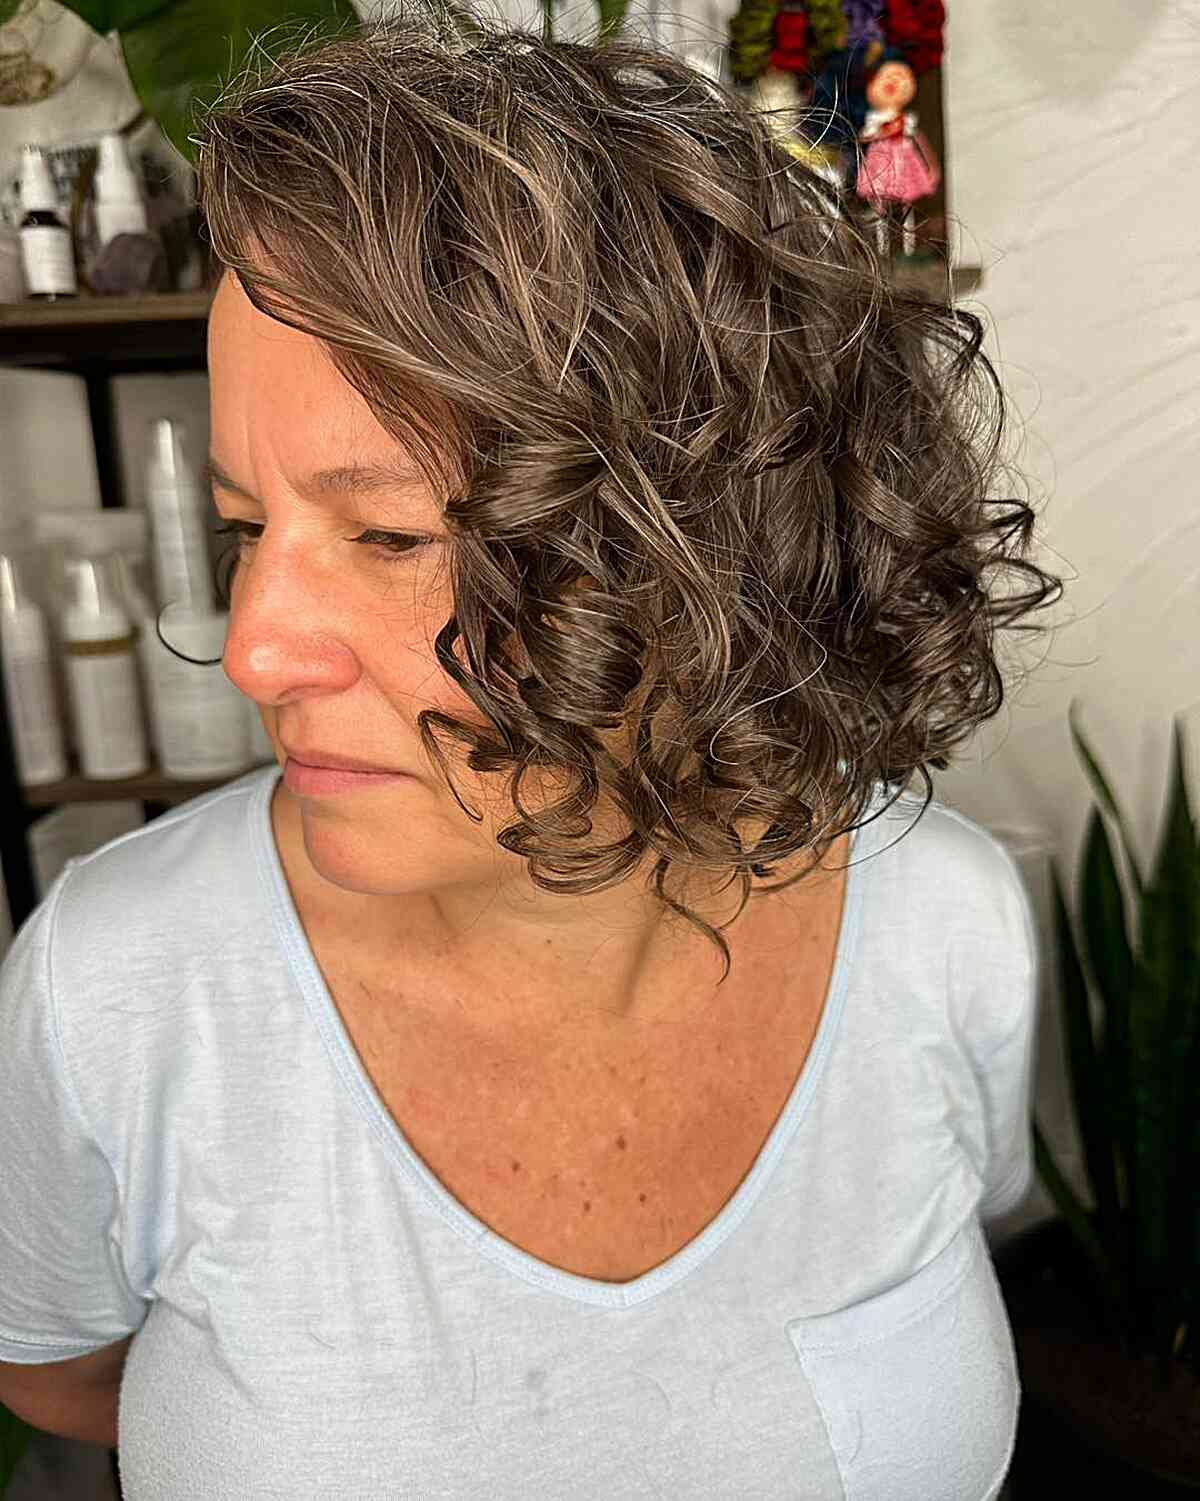 Chin-Length Deep Side Part Bob with Curls for Mature Ladies Over 60